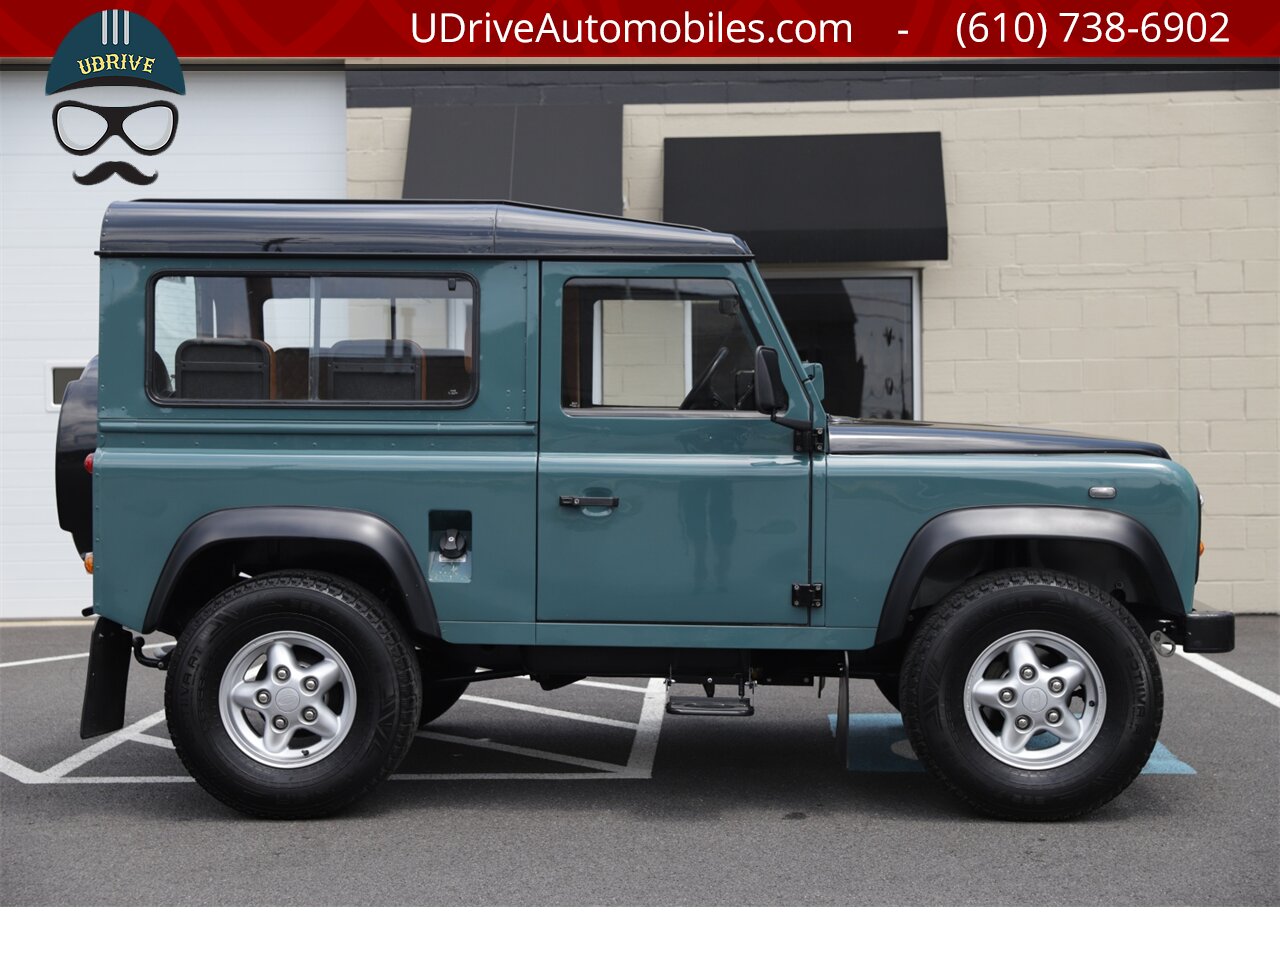 1986 Land Rover Defender 90 D90 4.0L V8 5 Speed Manual New Interior  $25k Recent Engine Build - Photo 18 - West Chester, PA 19382